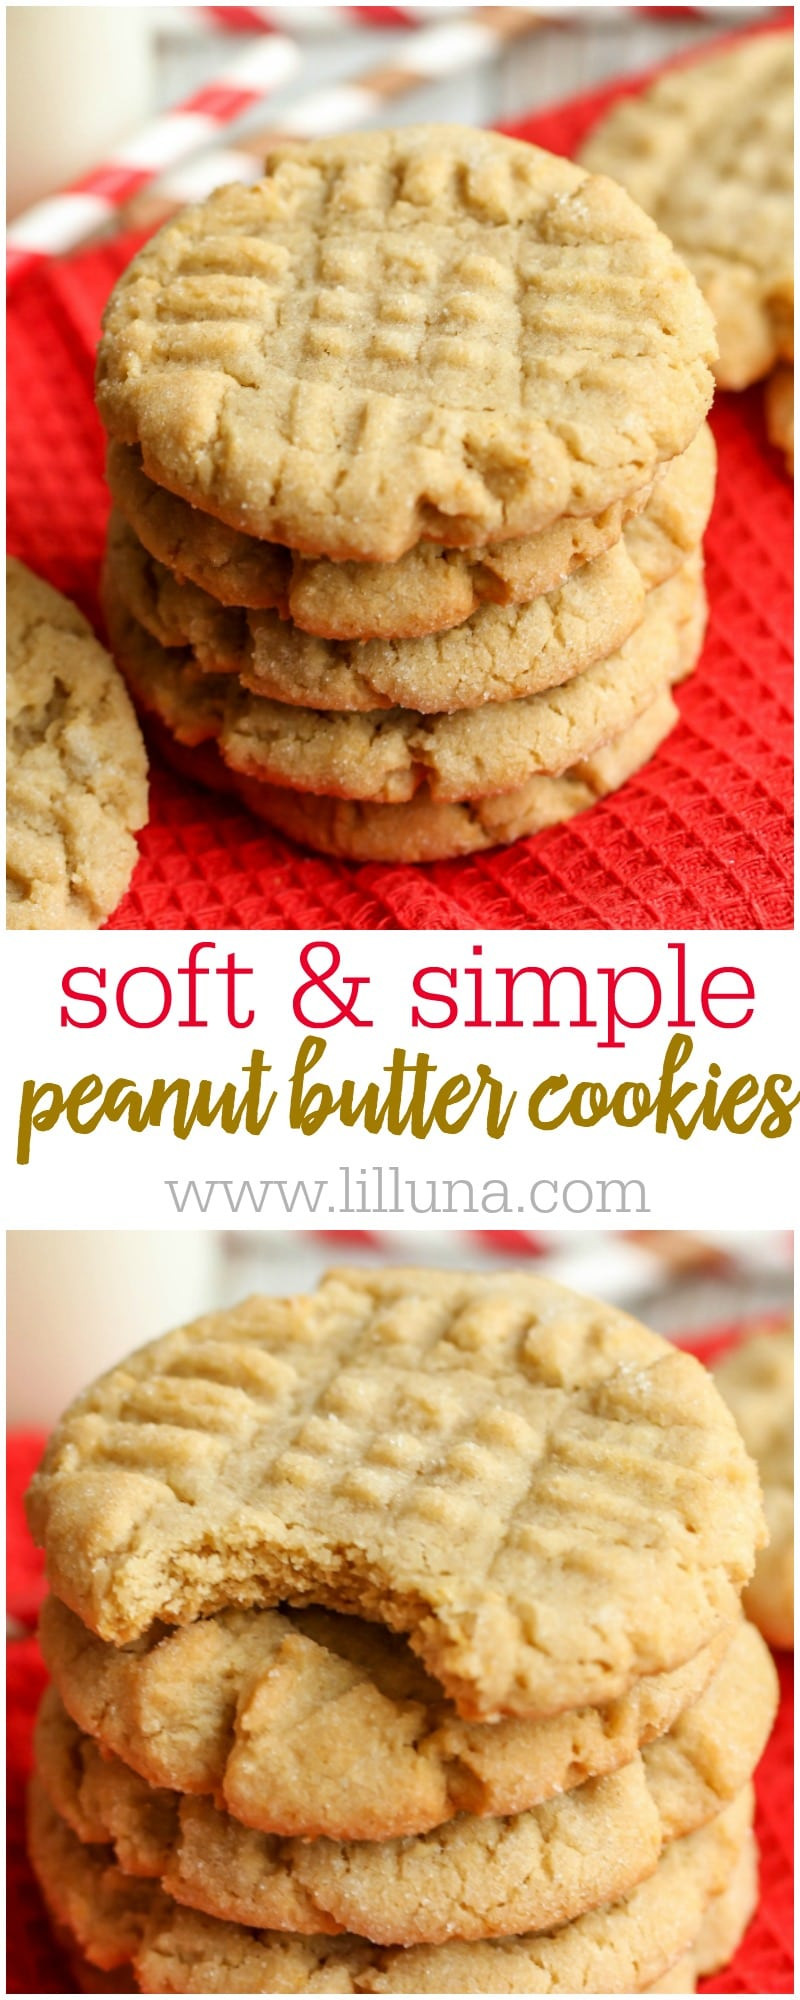 World'S Best Peanut Butter Cookies
 EASY & SOFT Peanut Butter Cookies